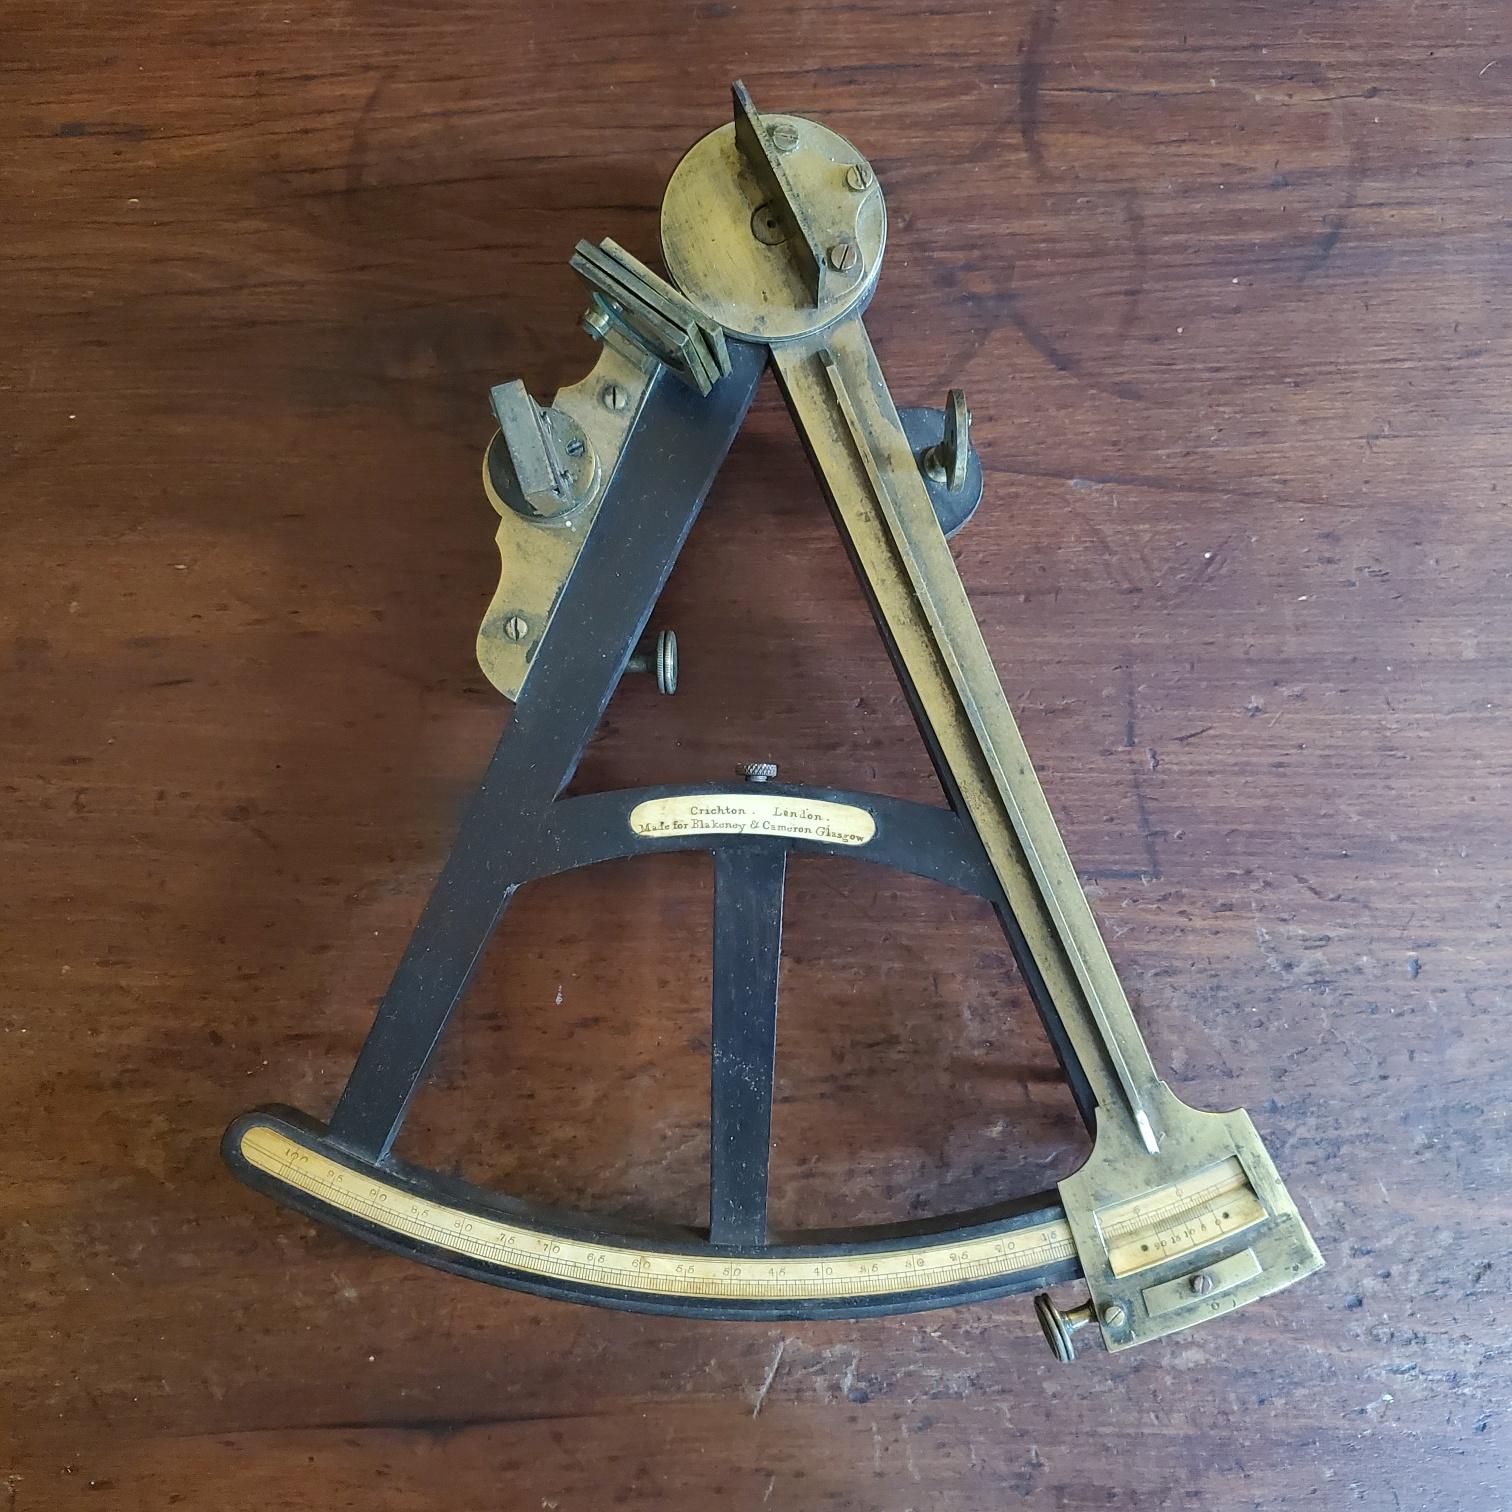 Early 19th century Naval Navigational Octant by John Crichton (London) in Original Case, circa 1830s, an ebony frame quadrant with brass mounted lens, mirror, shades, index arm, hinge and feet, with bone calibrated scale and maker's plaque inscribed